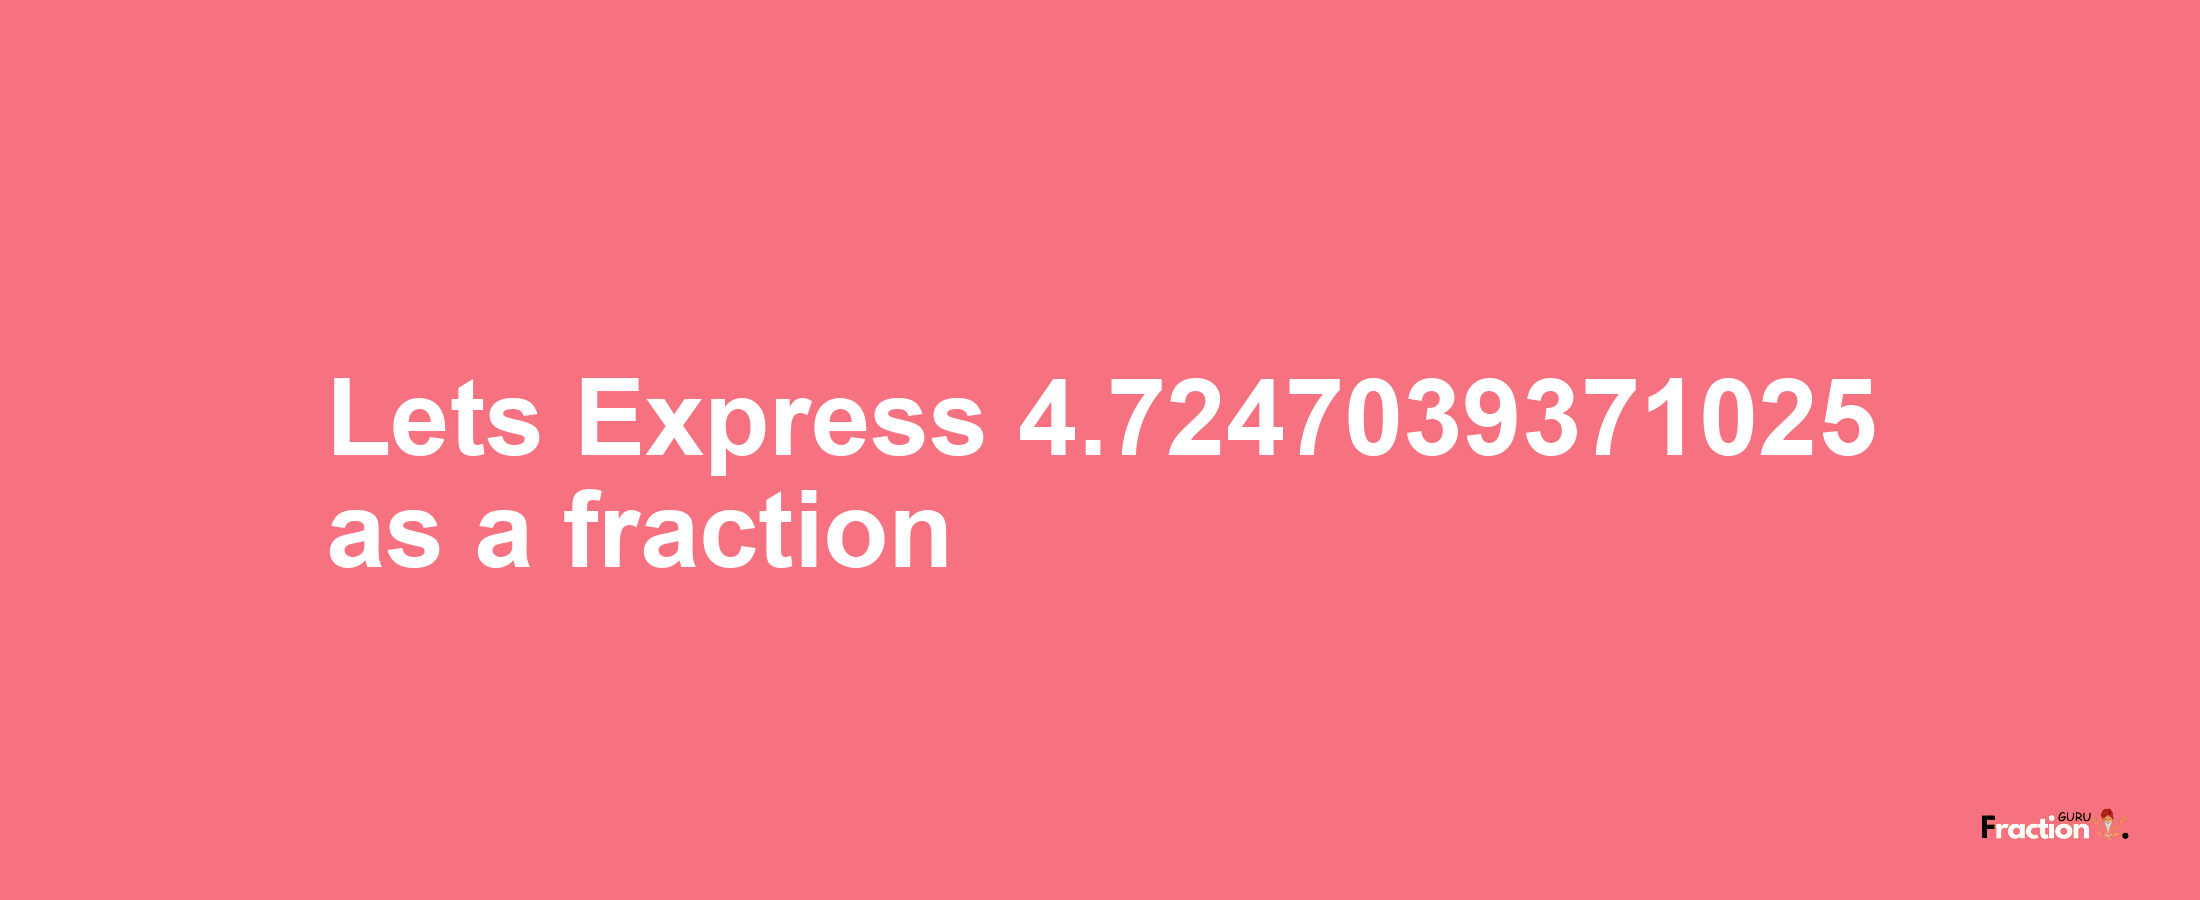 Lets Express 4.7247039371025 as afraction